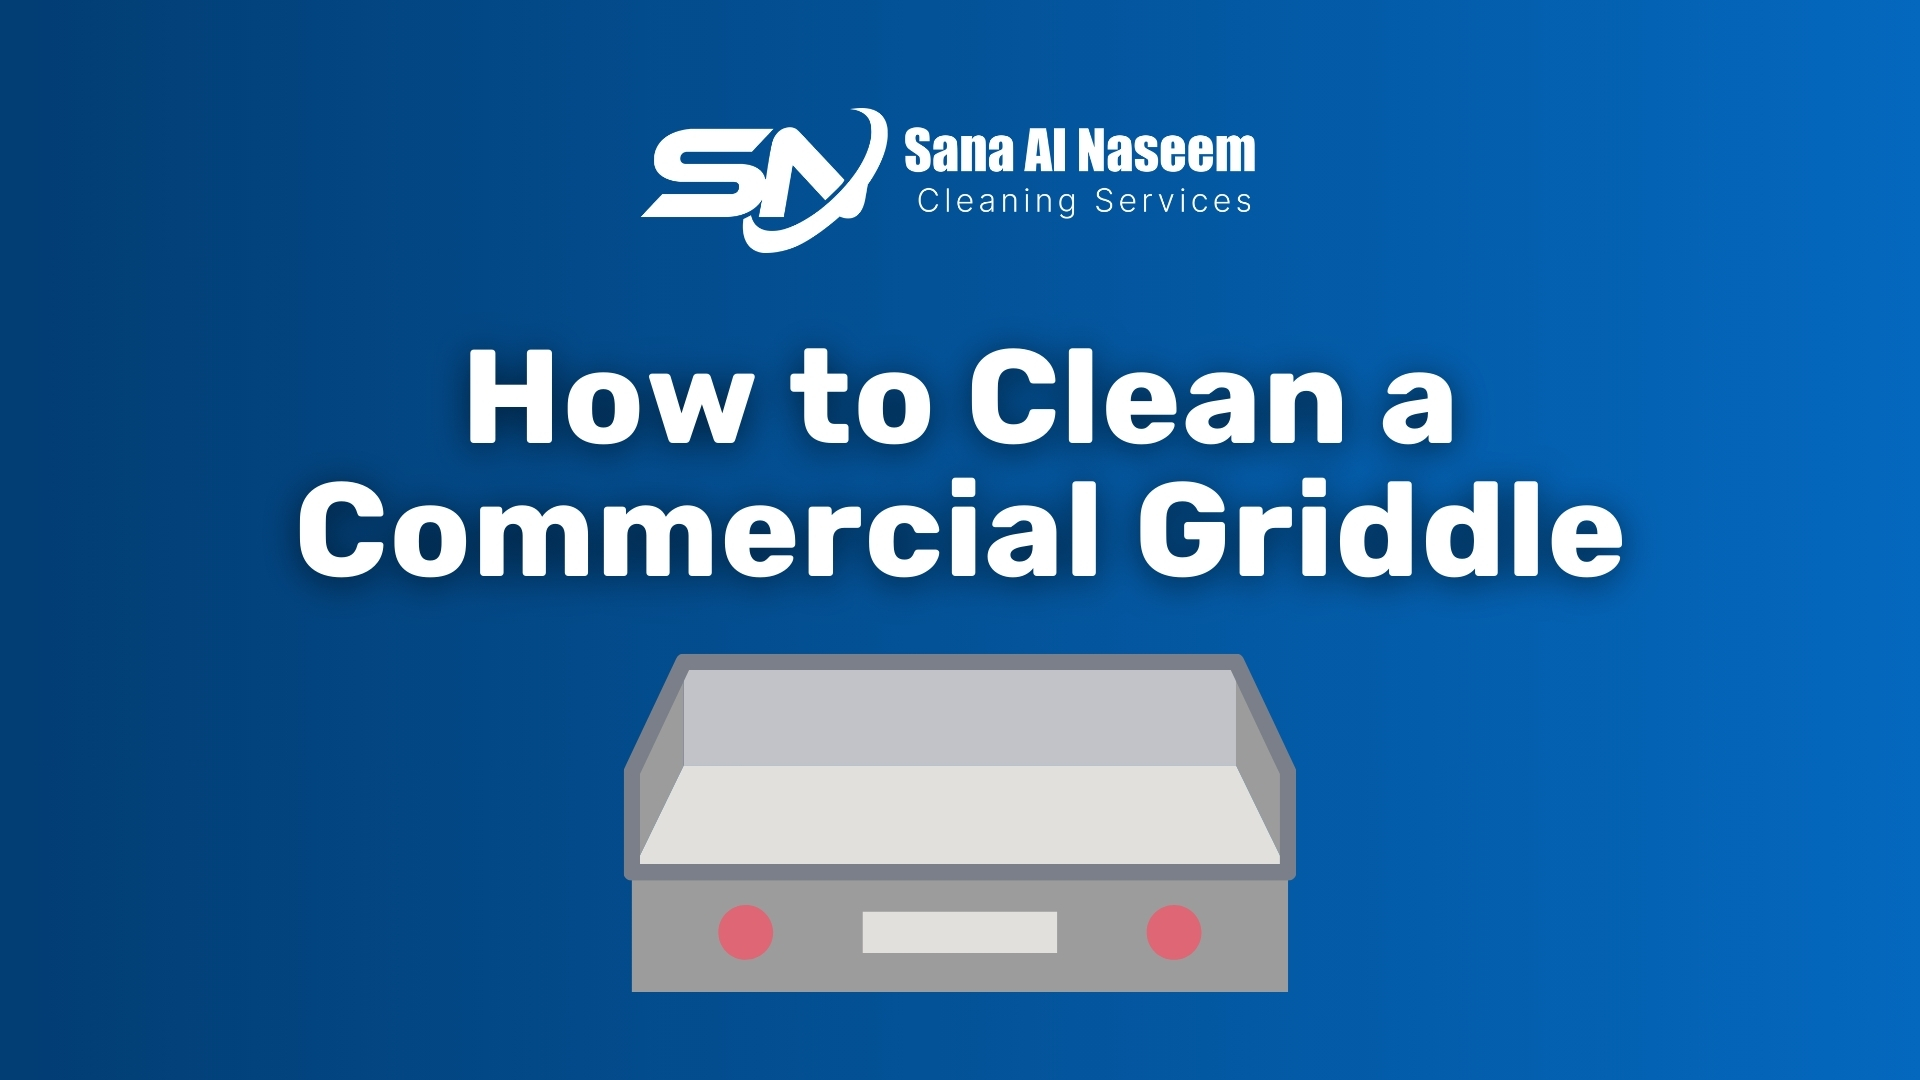 How to Clean a Commercial Griddle